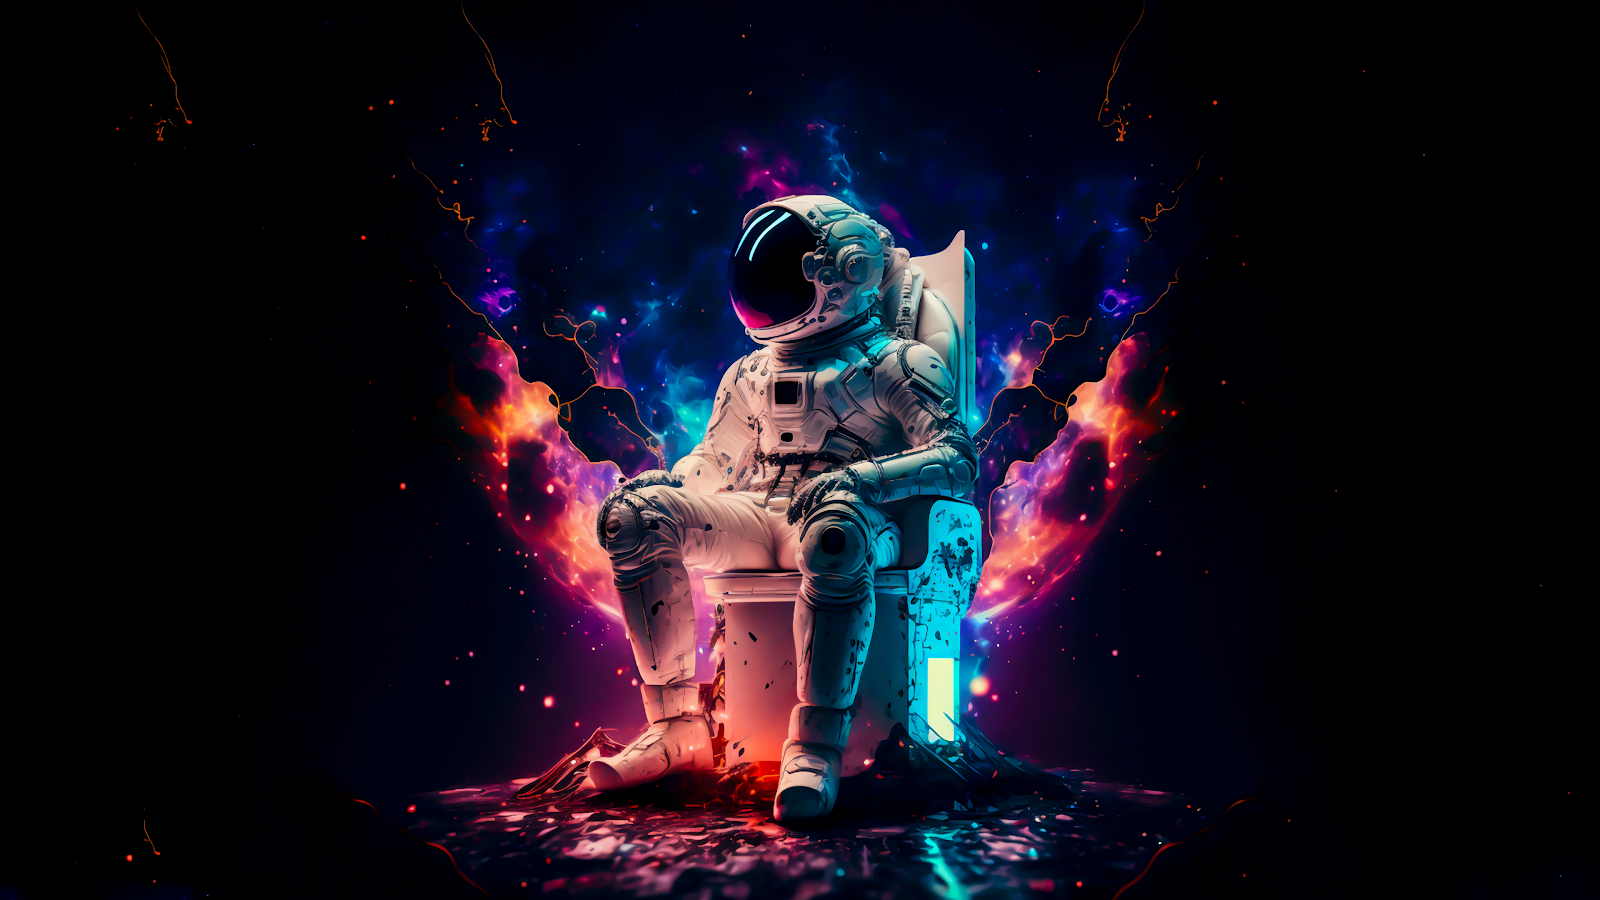 100 Astronaut Pictures  Download Free Images on Unsplash